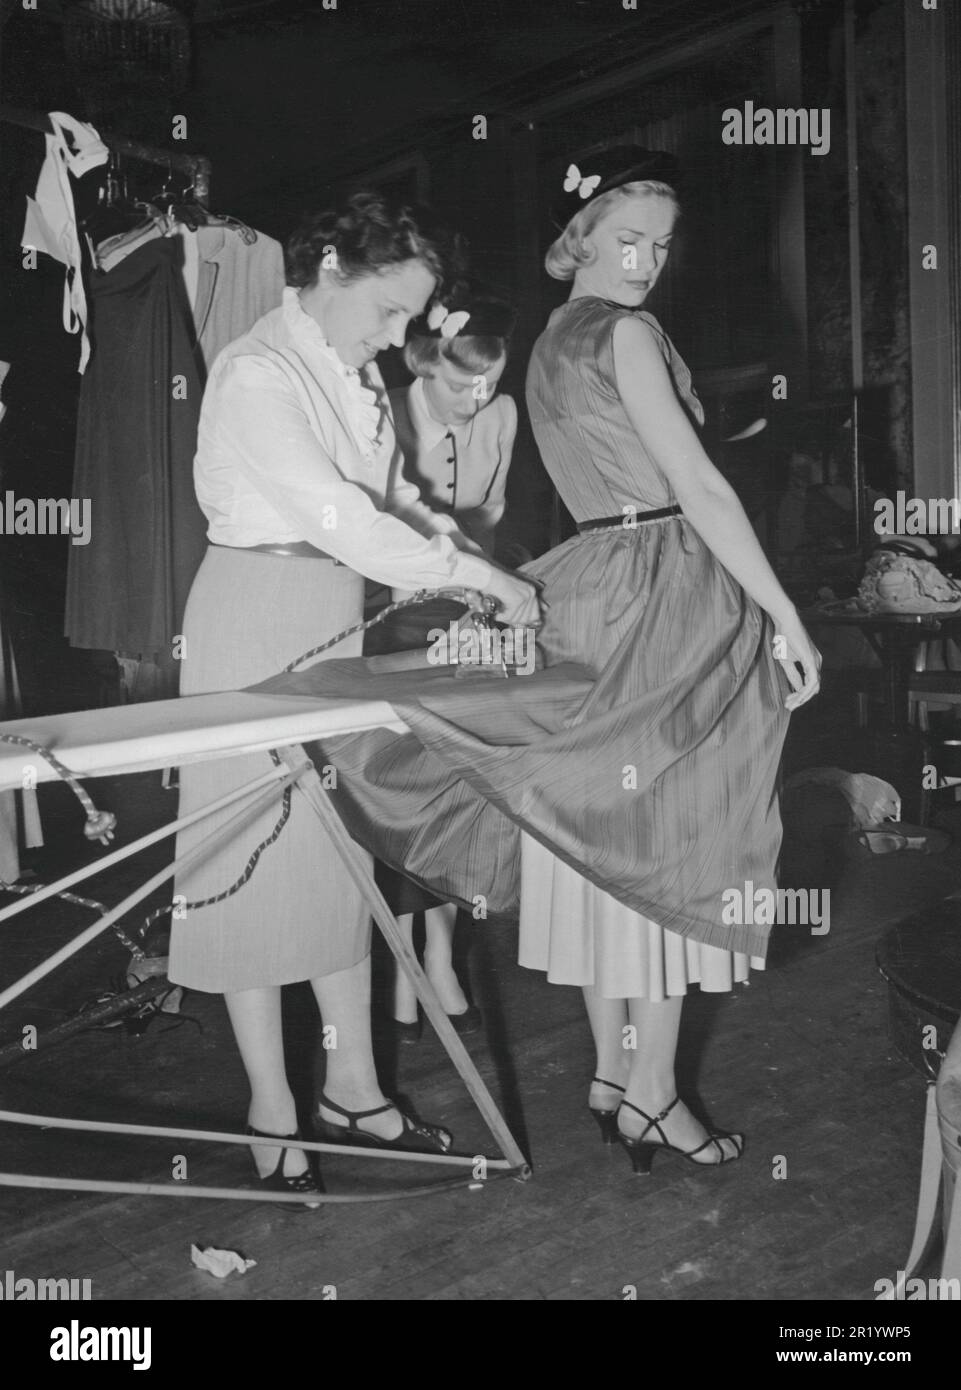 Women's fashion in the 1950s. The young fashion model stands absolutely still while an assistant irons her dress just moments before the model goes on stage to show it. It's in the details of course and a behind the scenes photograph. Sweden 1951 Stock Photo